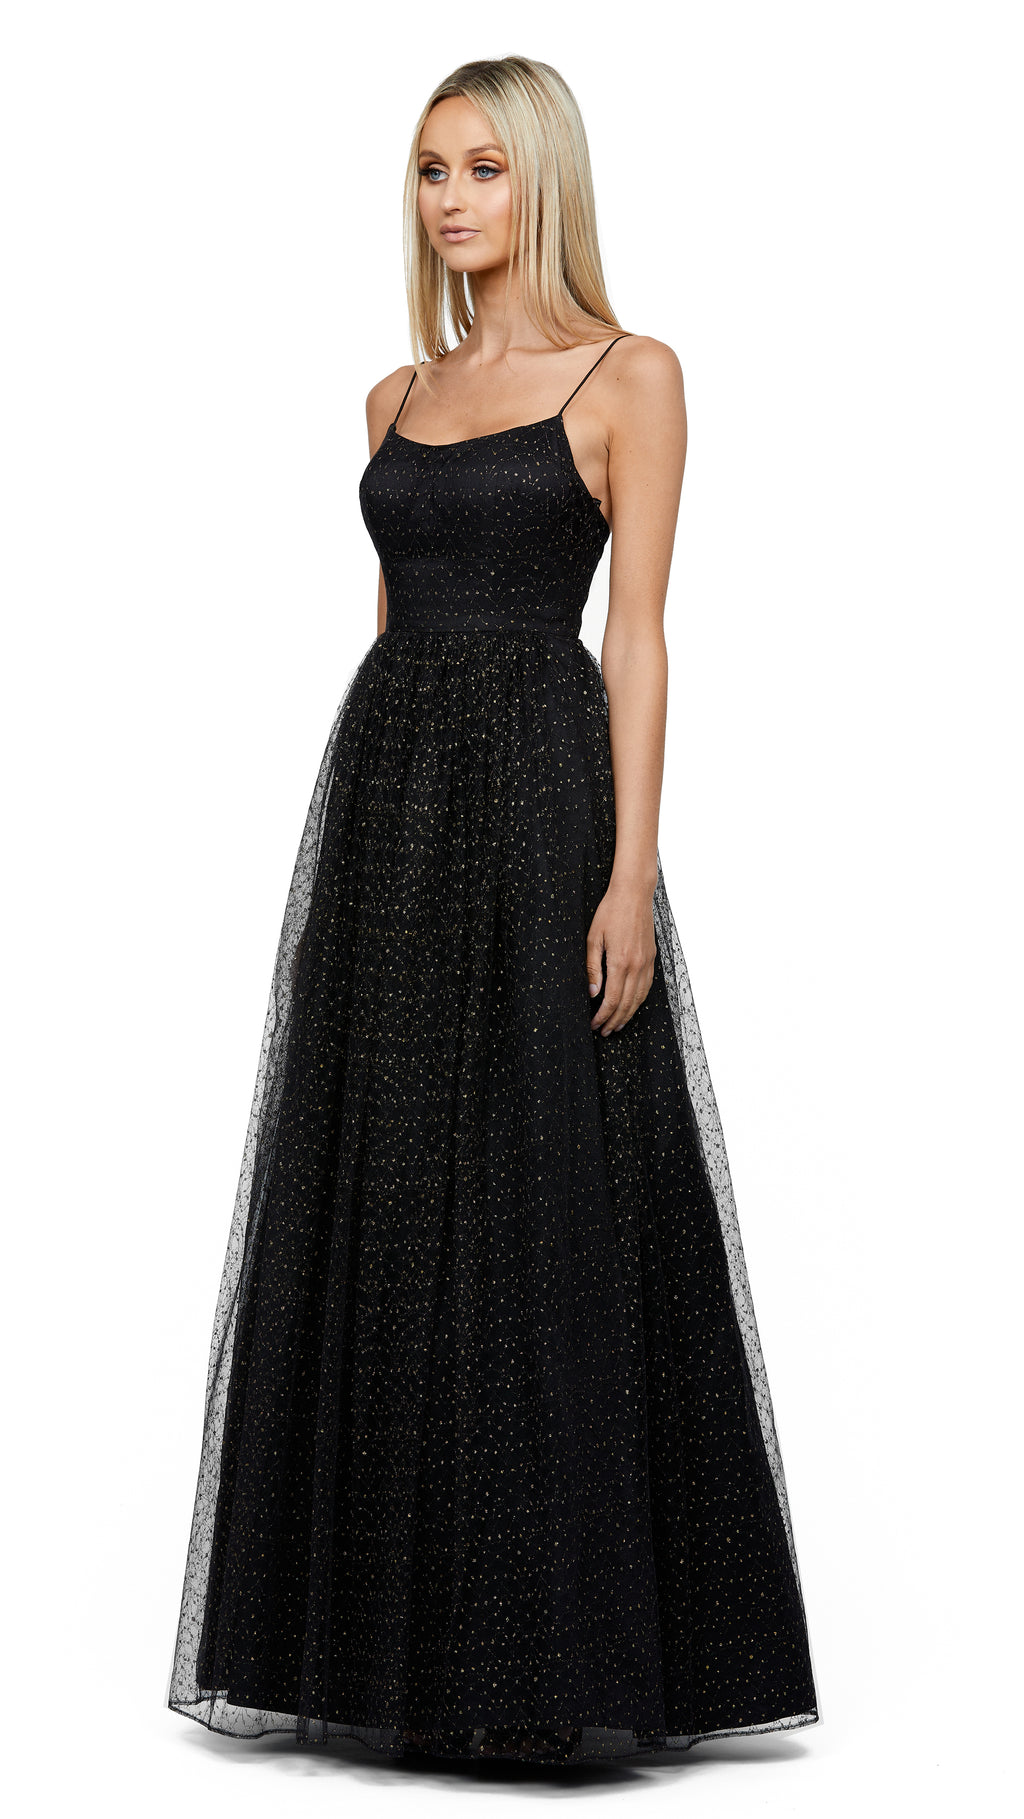 Sorrento Scoop Neck Ball Gown in Black/Gold SIDE